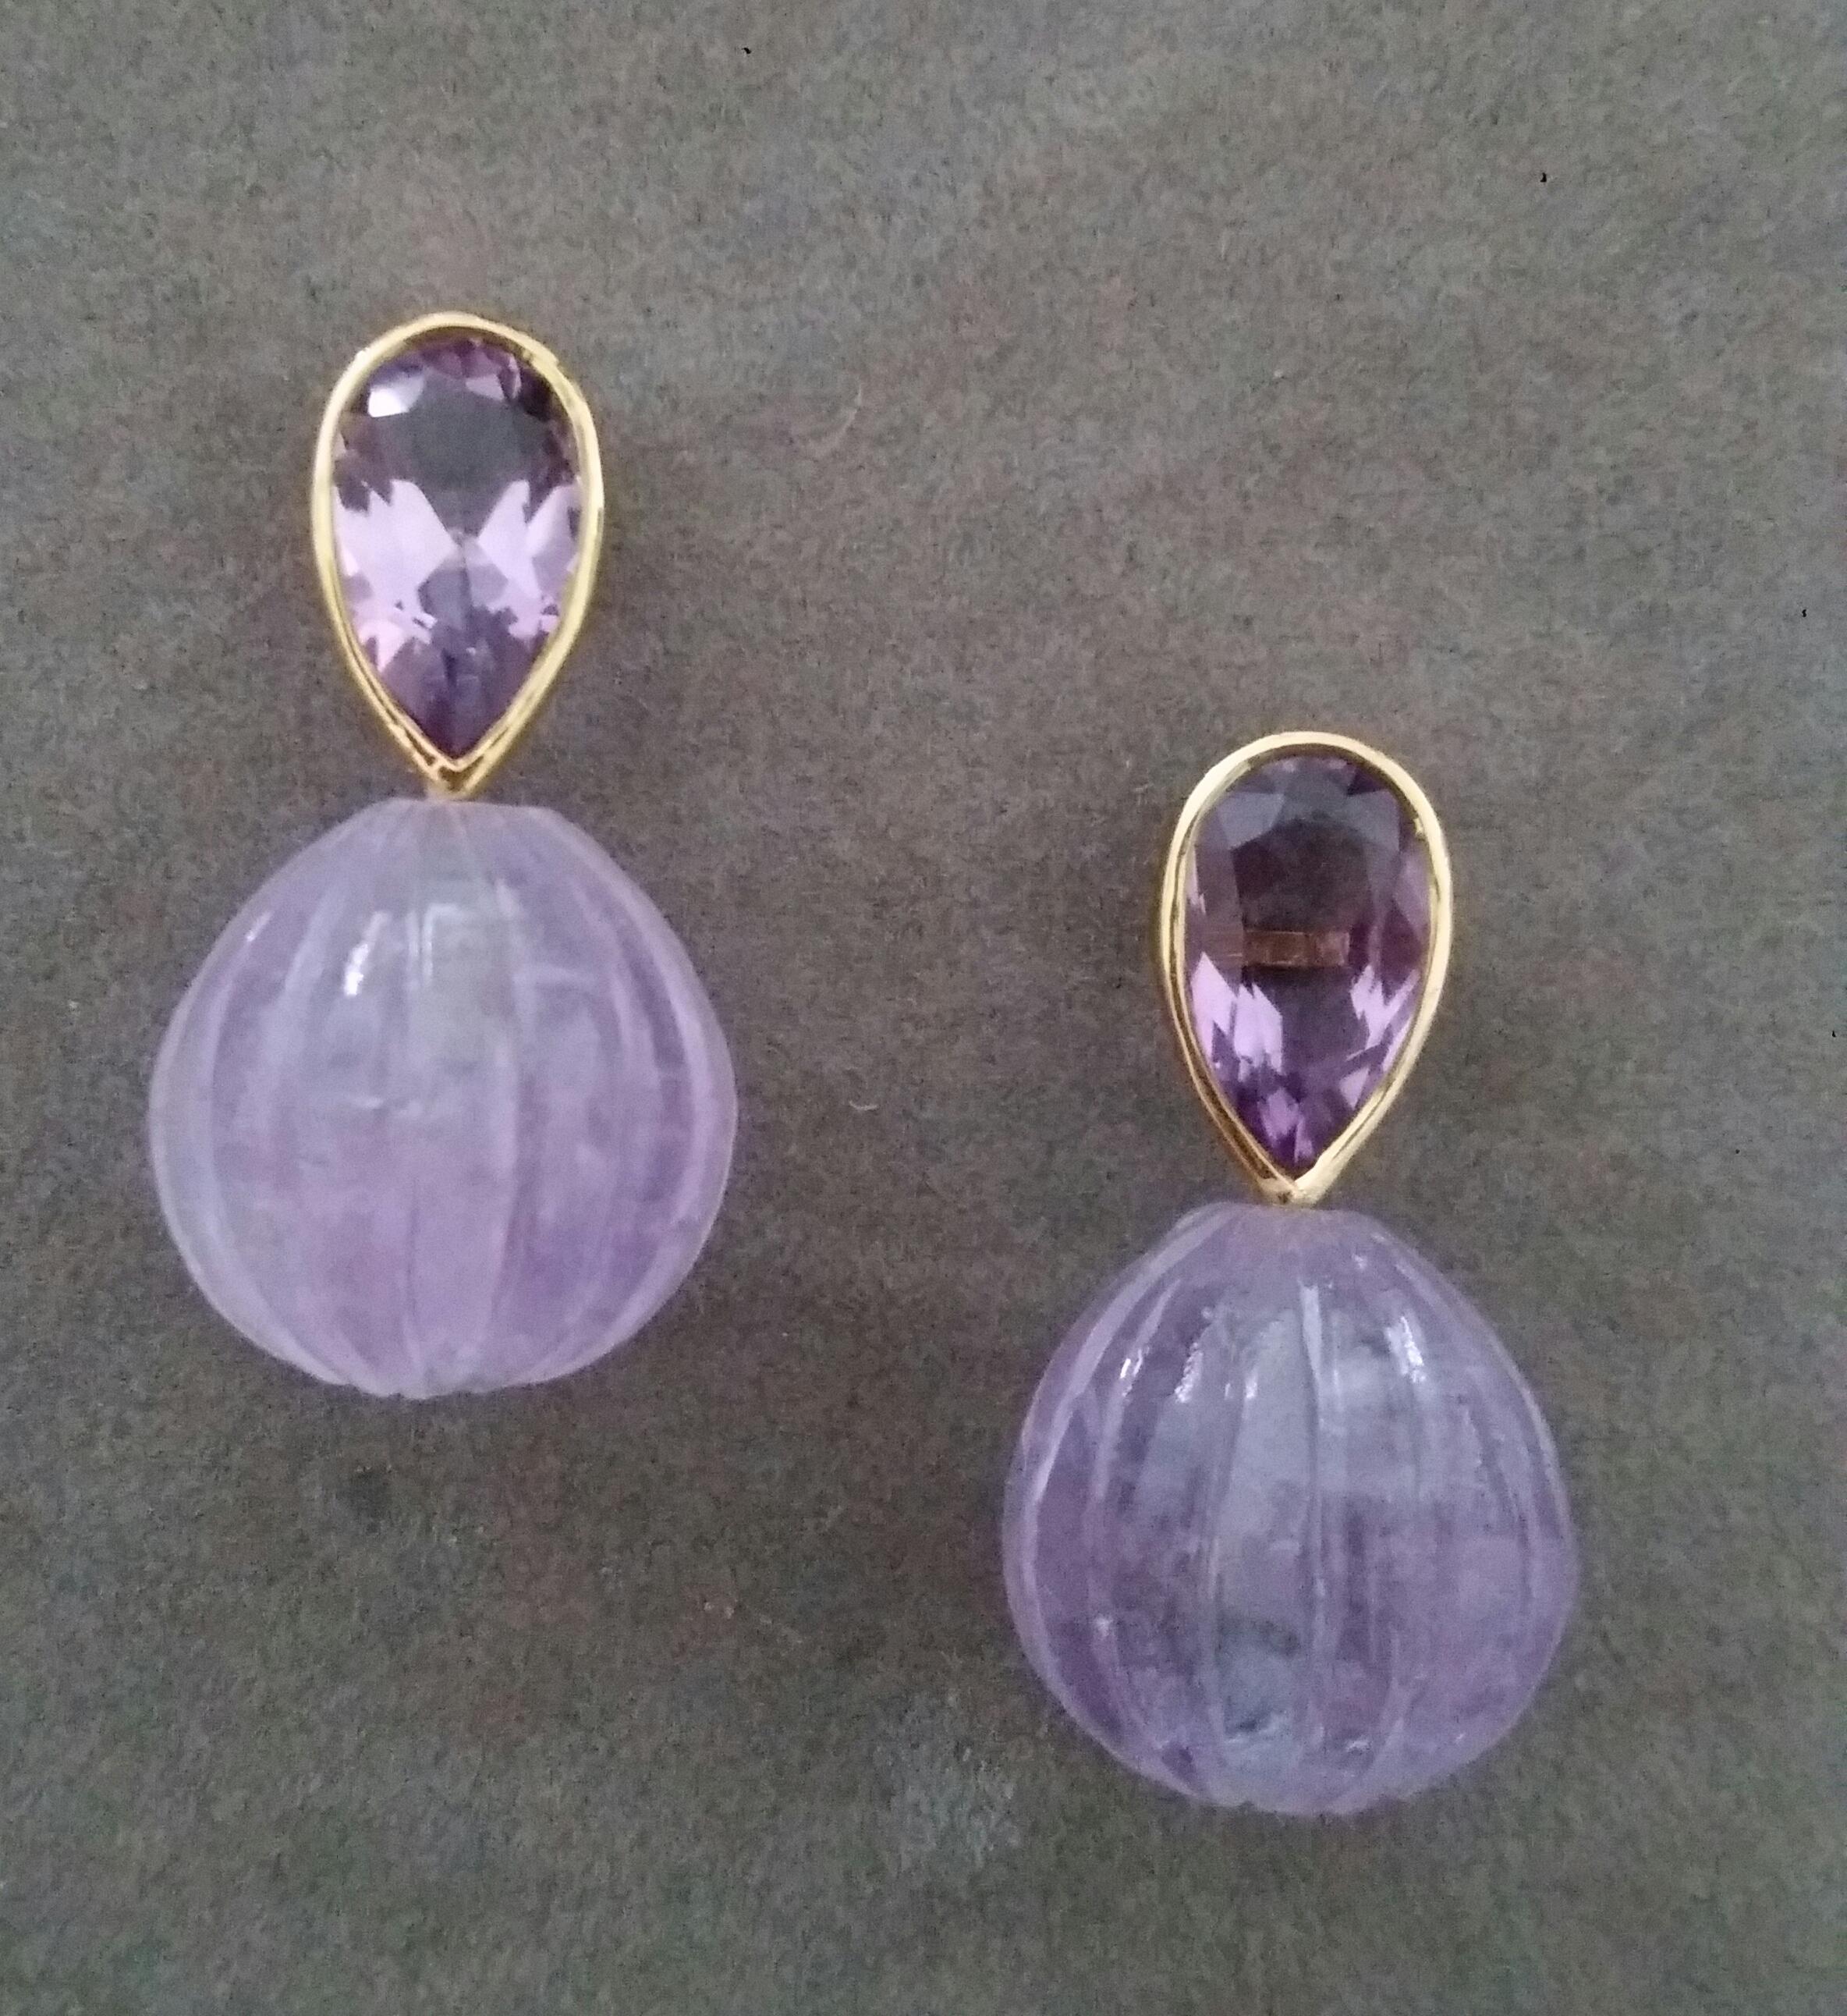 These simple but elegant handmade earrings have 2 faceted Natural Pear Shape Amethysts measuring 7 x 12 mm and weighing 4,55 carats set in yellow gold bezel at the top to which are suspended 2 Engraved Round Drop Shape Amethyst measuring 15x15